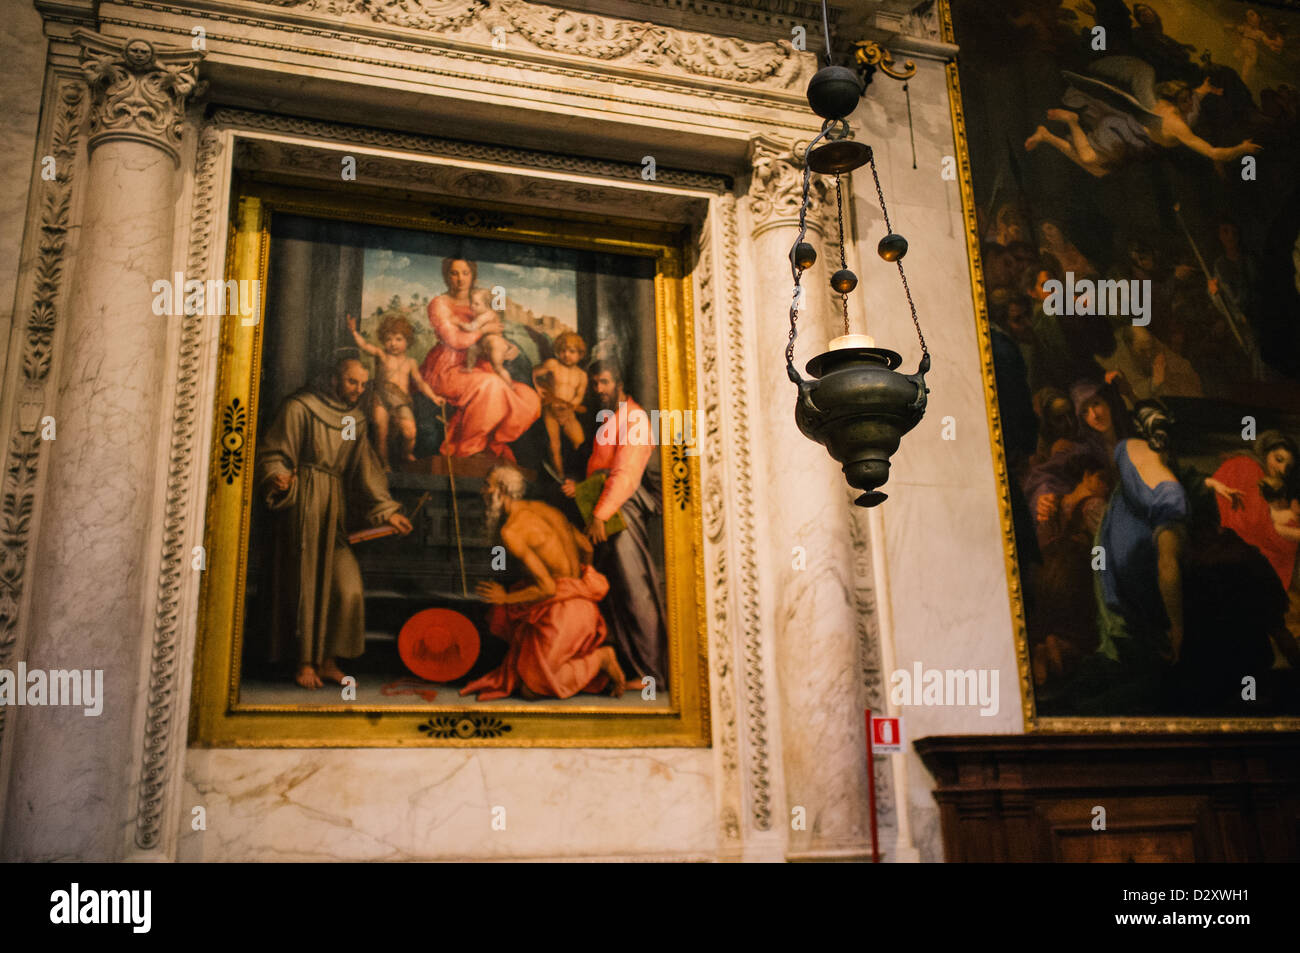 Inside the Duomo (cathedral) in the PIazza dei Miracoli in Pisa, Italy Stock Photo